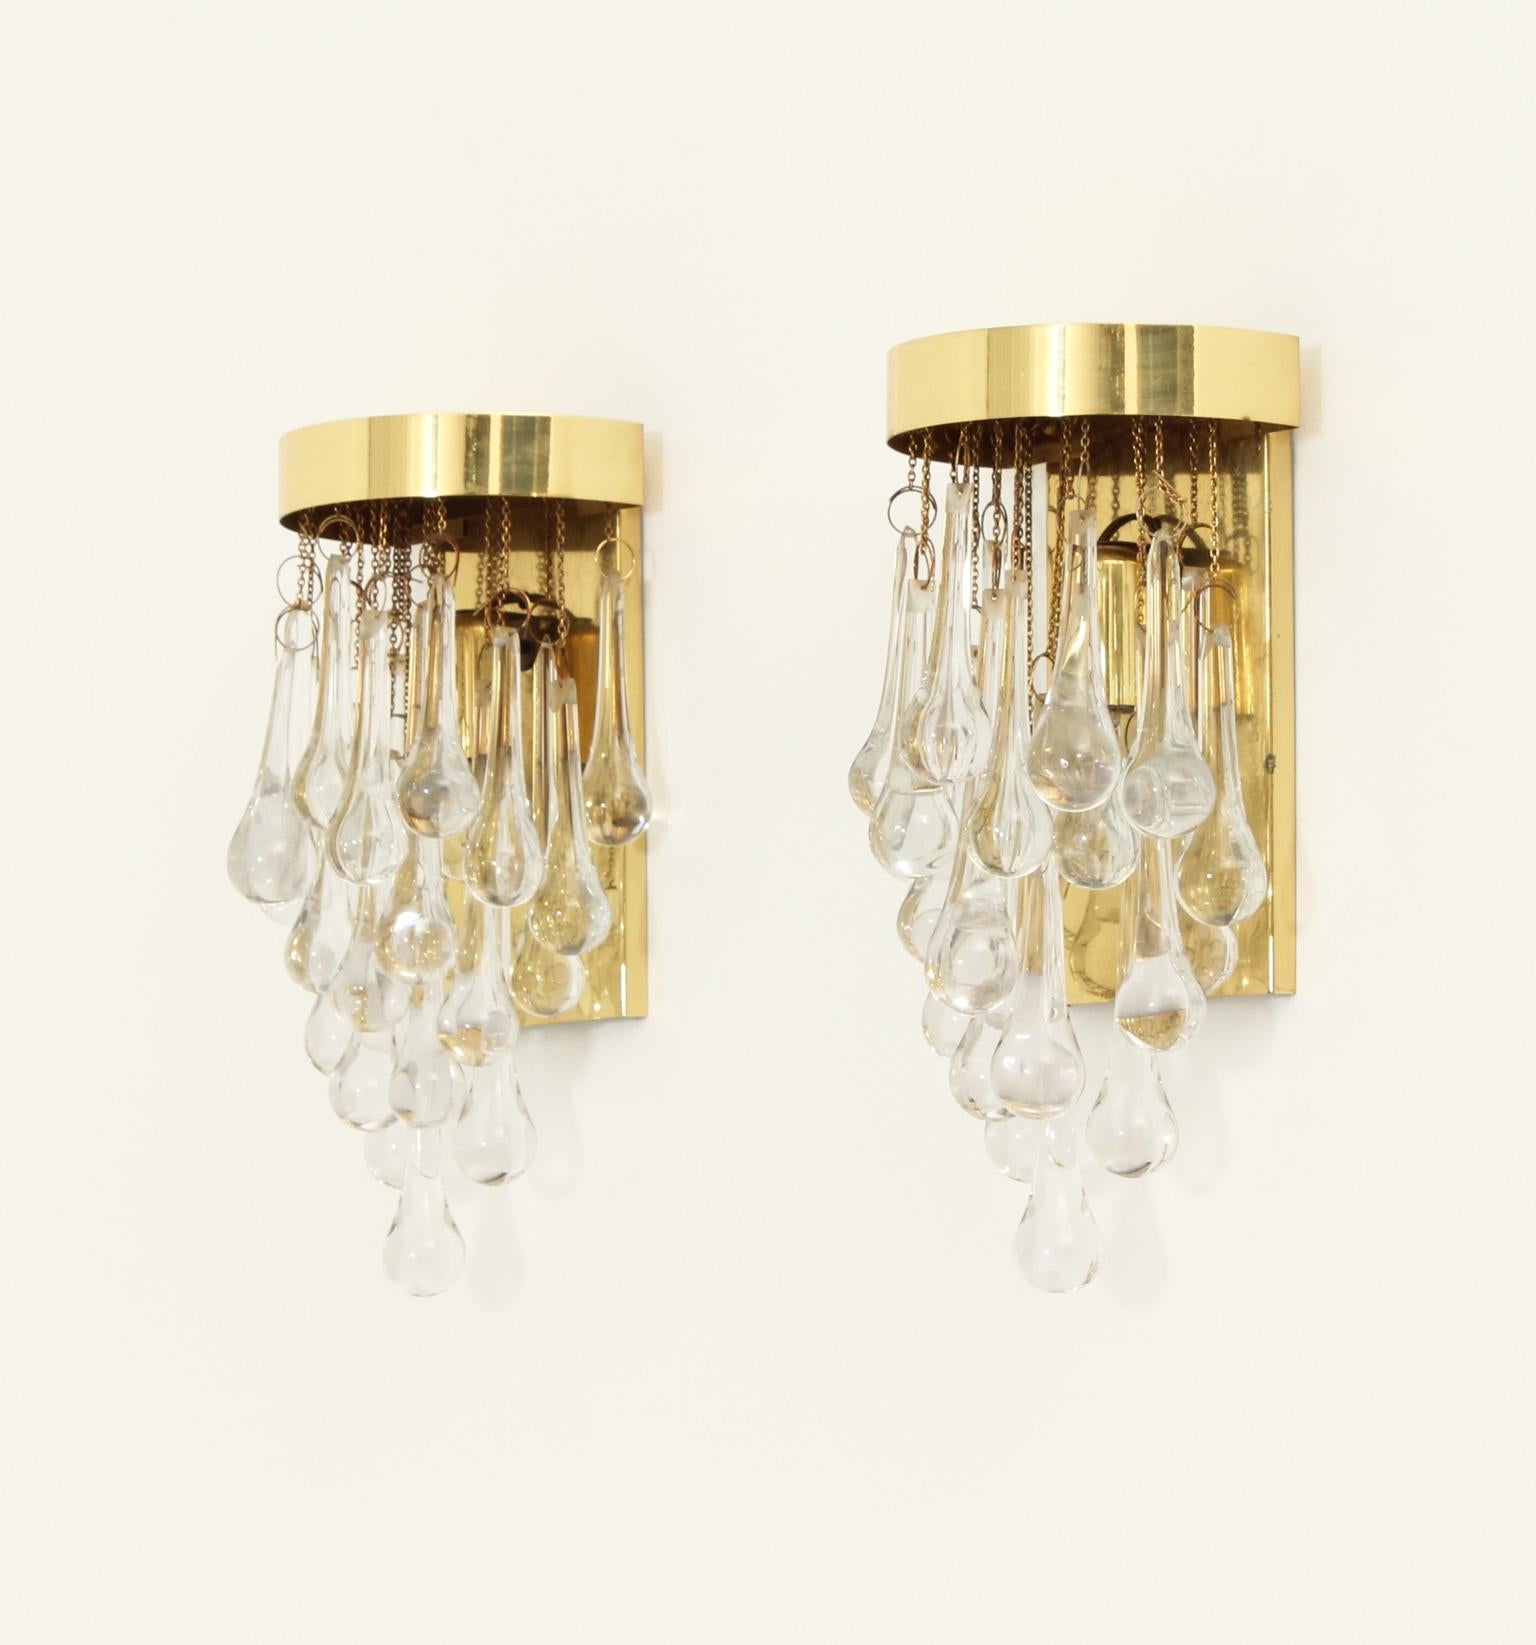 Hollywood Regency Pair of Brass and Glass Teardrop Sconces by Lumica, Spain, 1970's